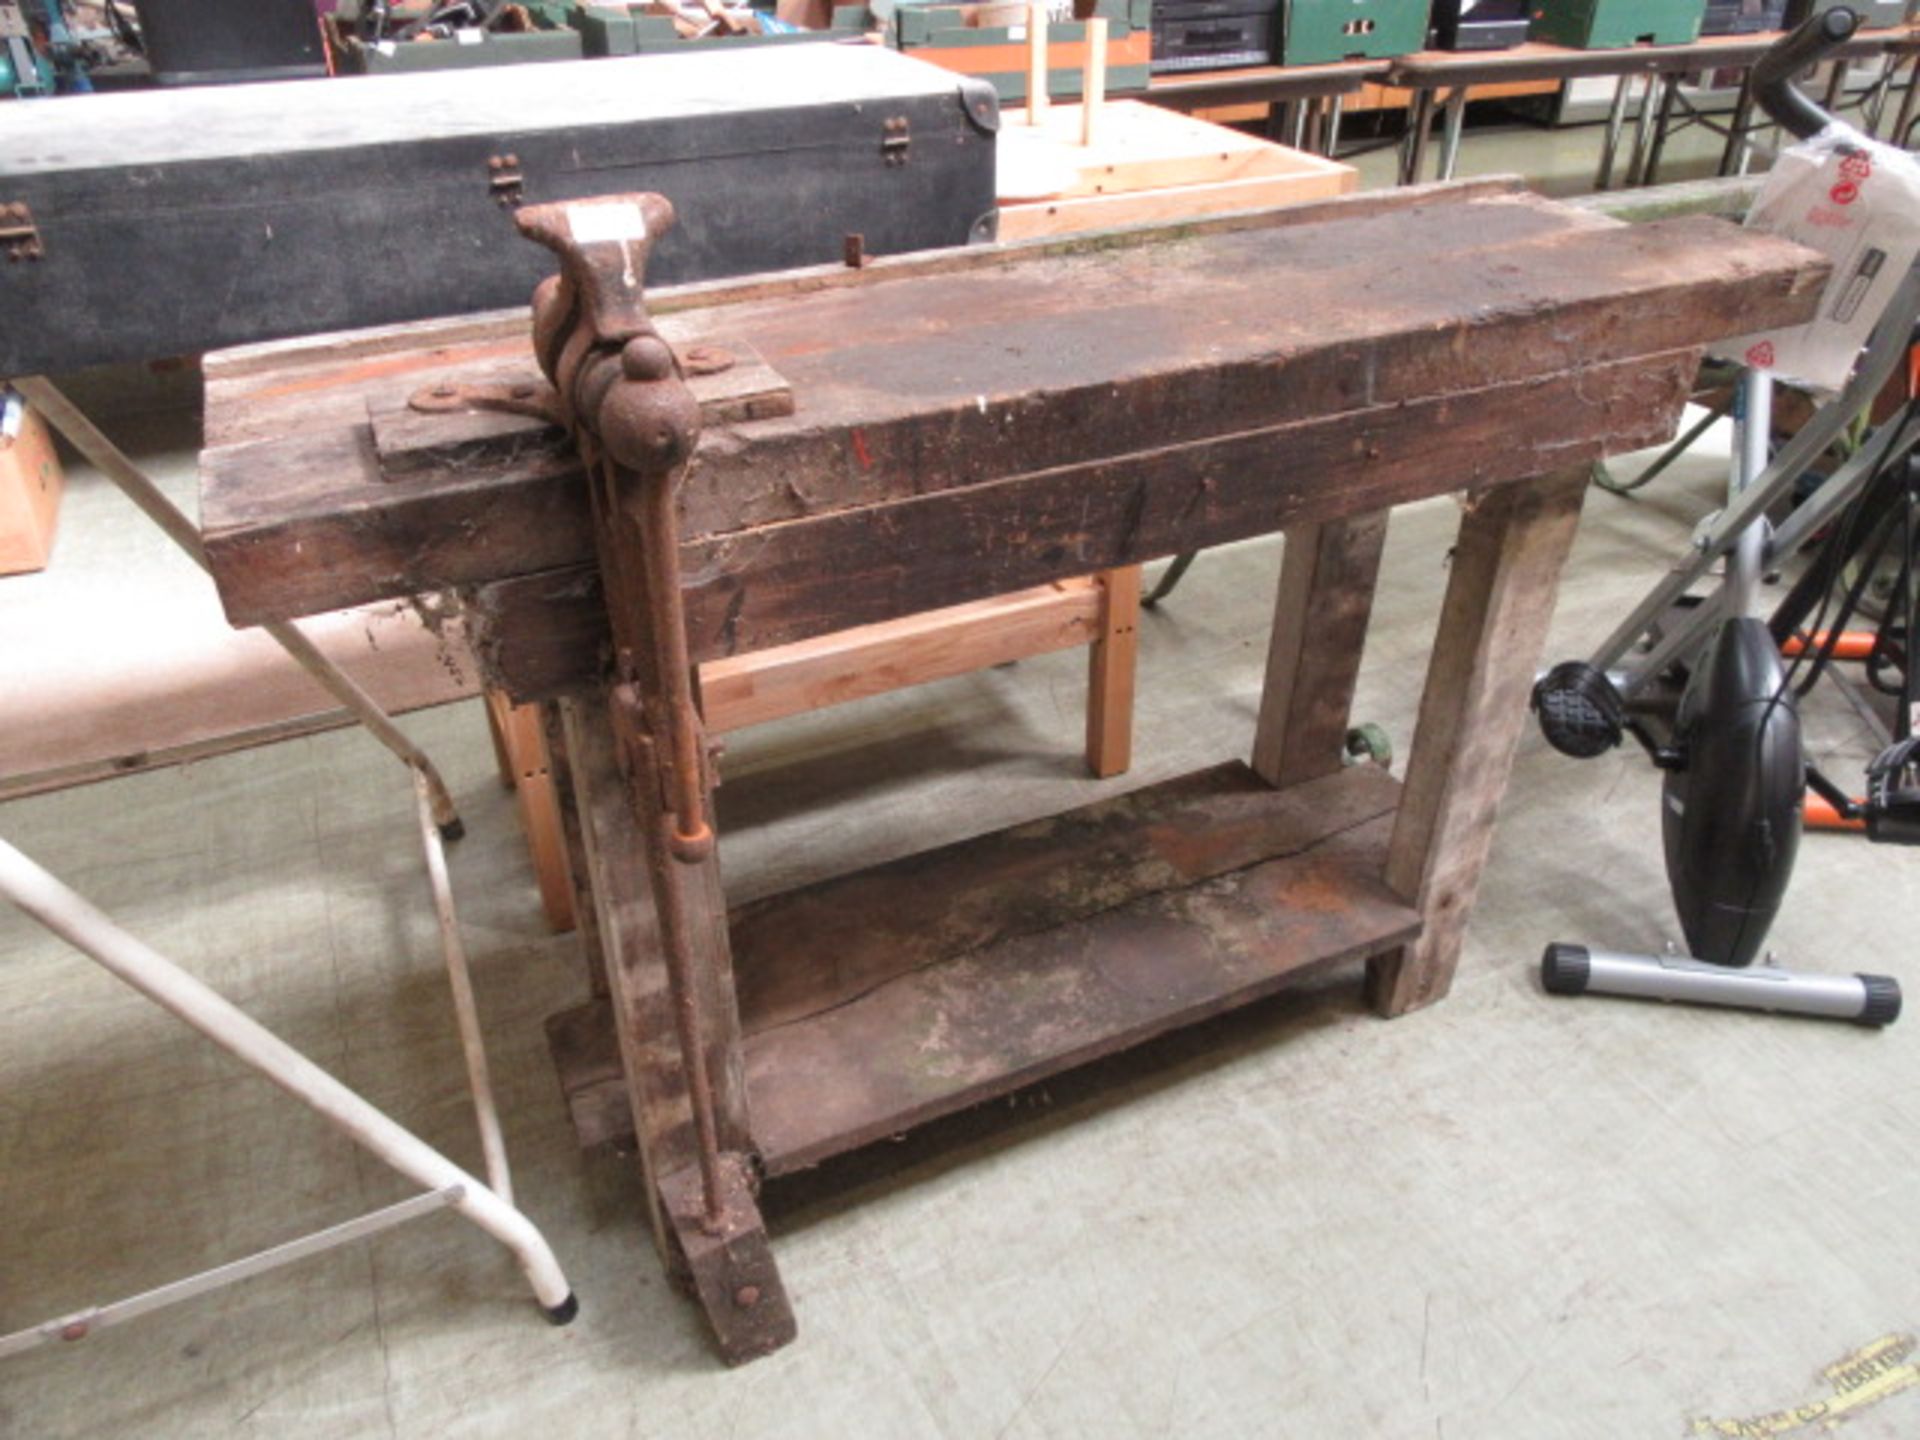 A wooden work bench with vice